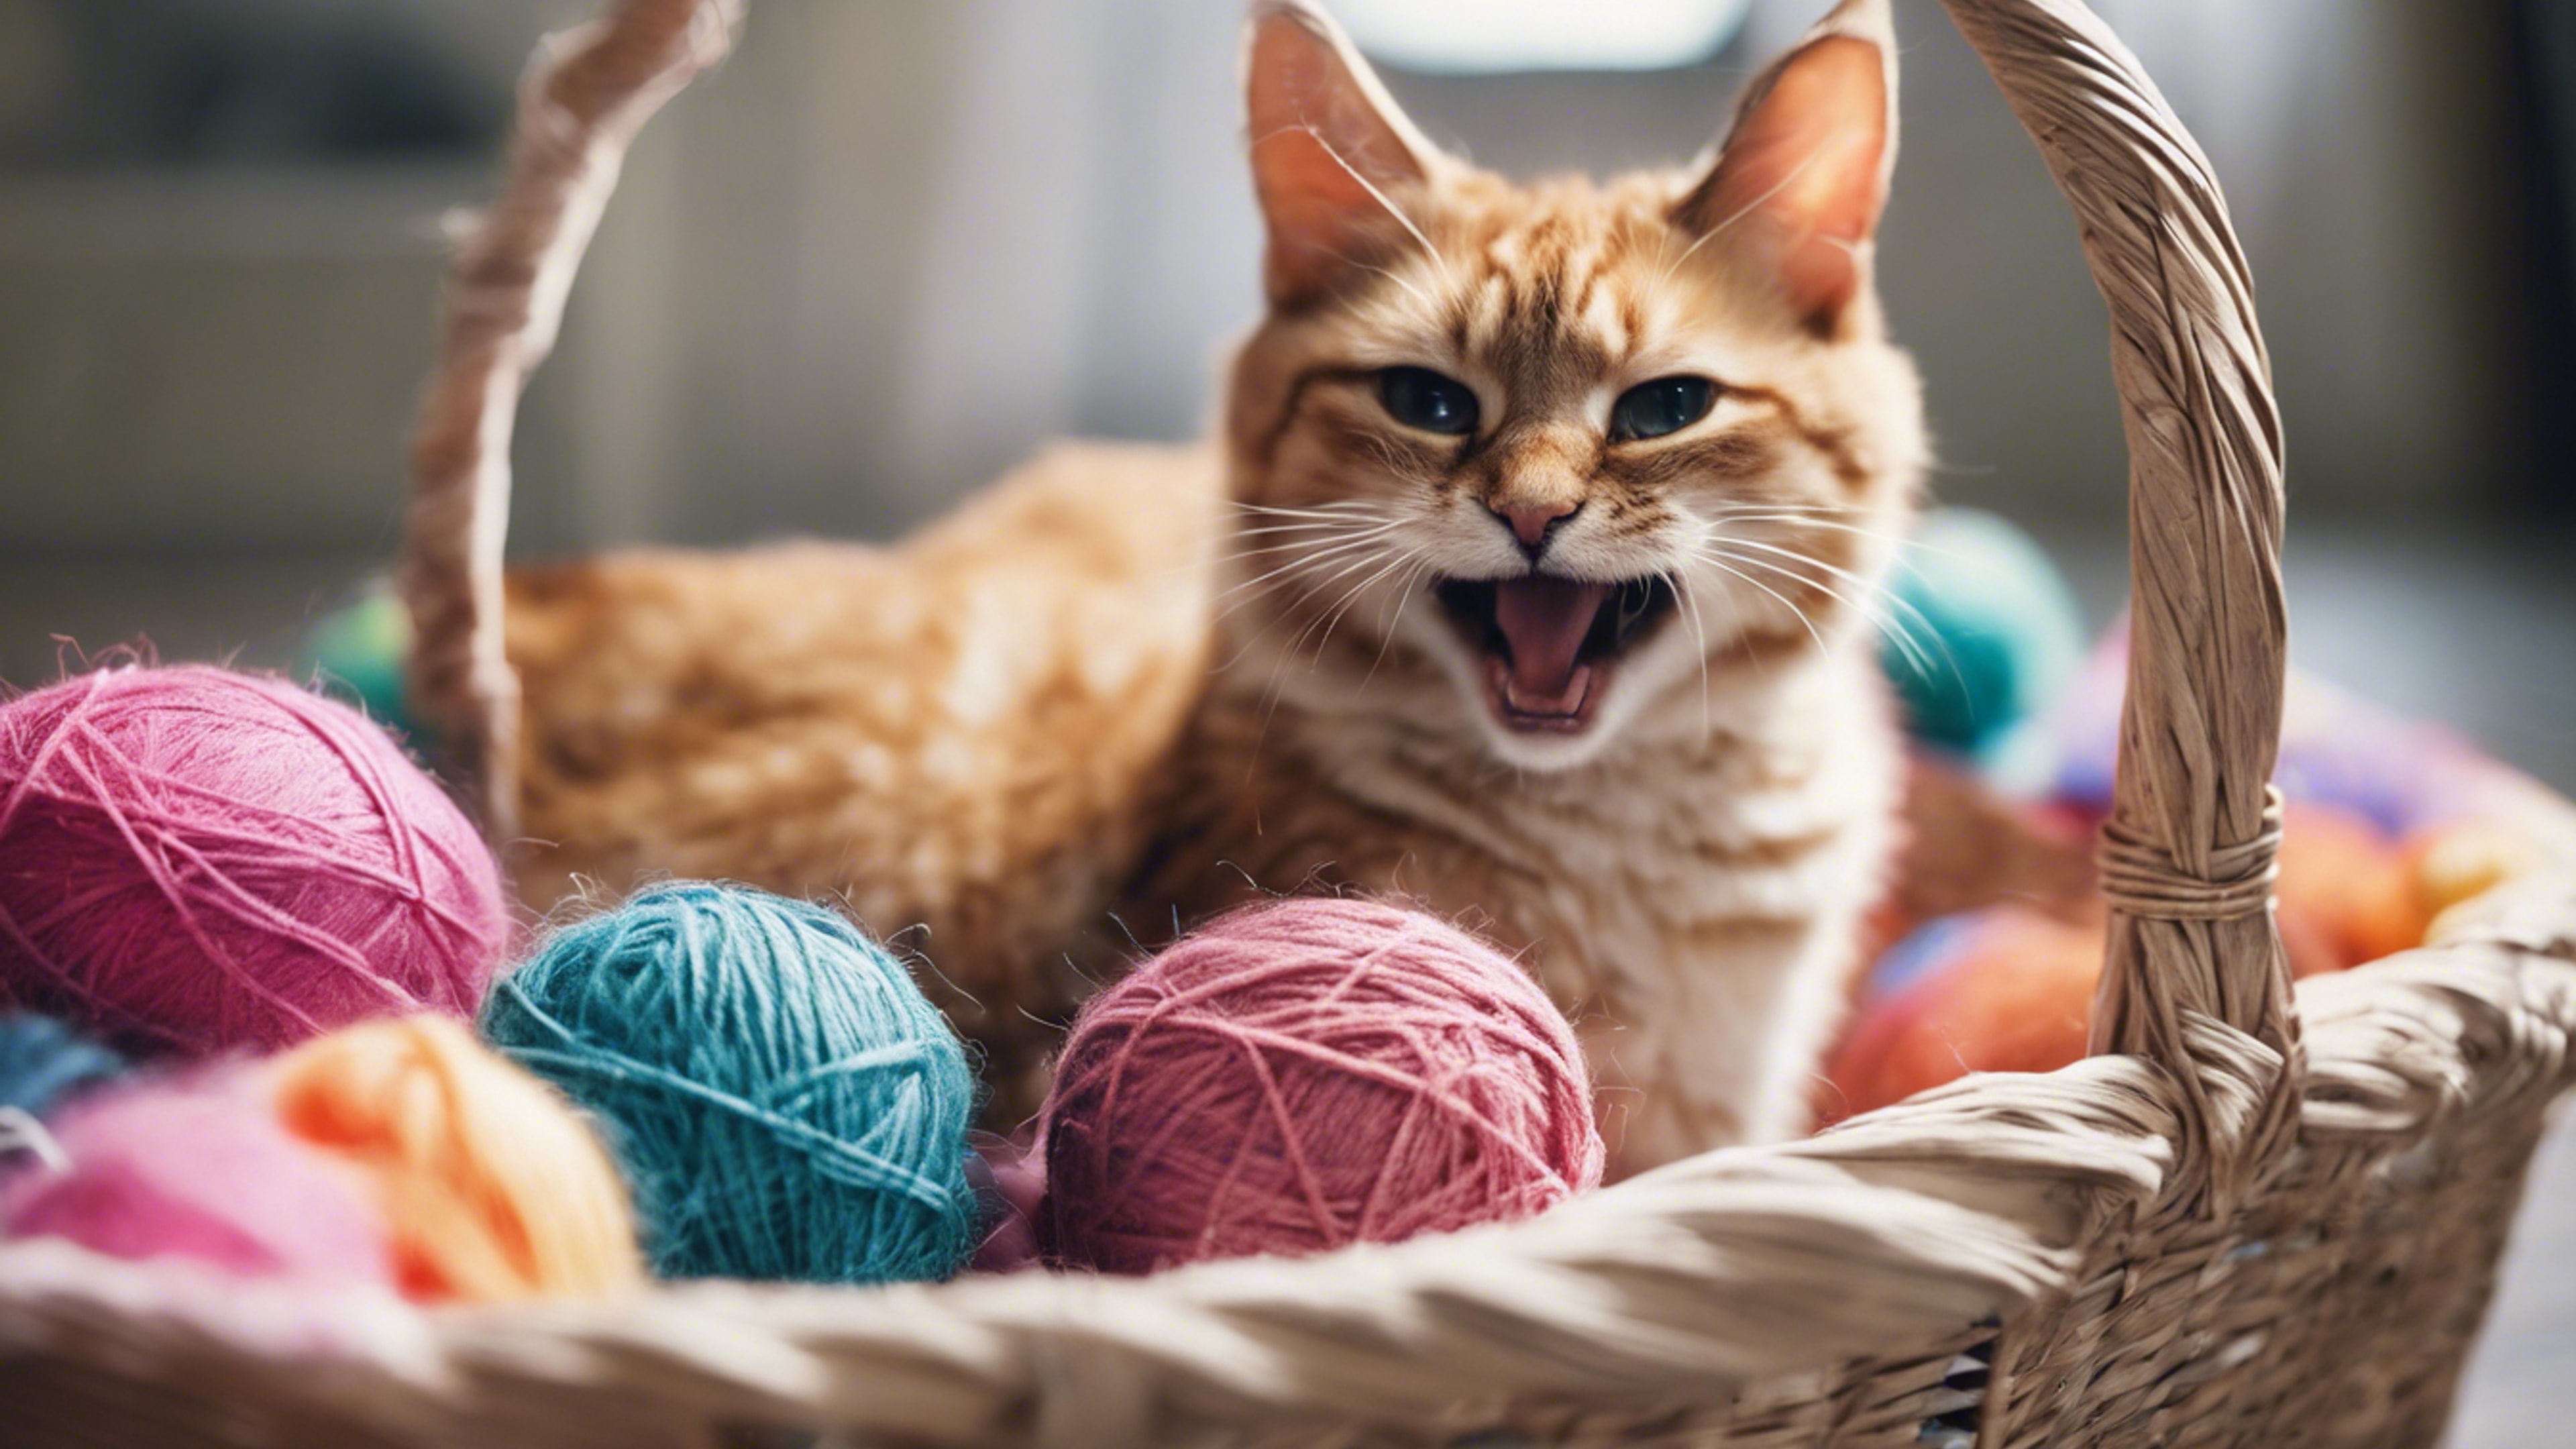 A cat mid-yawn in a basket filled with soft, colorful balls of yarn.壁紙[4de2b2f4a75d42f7bbf8]